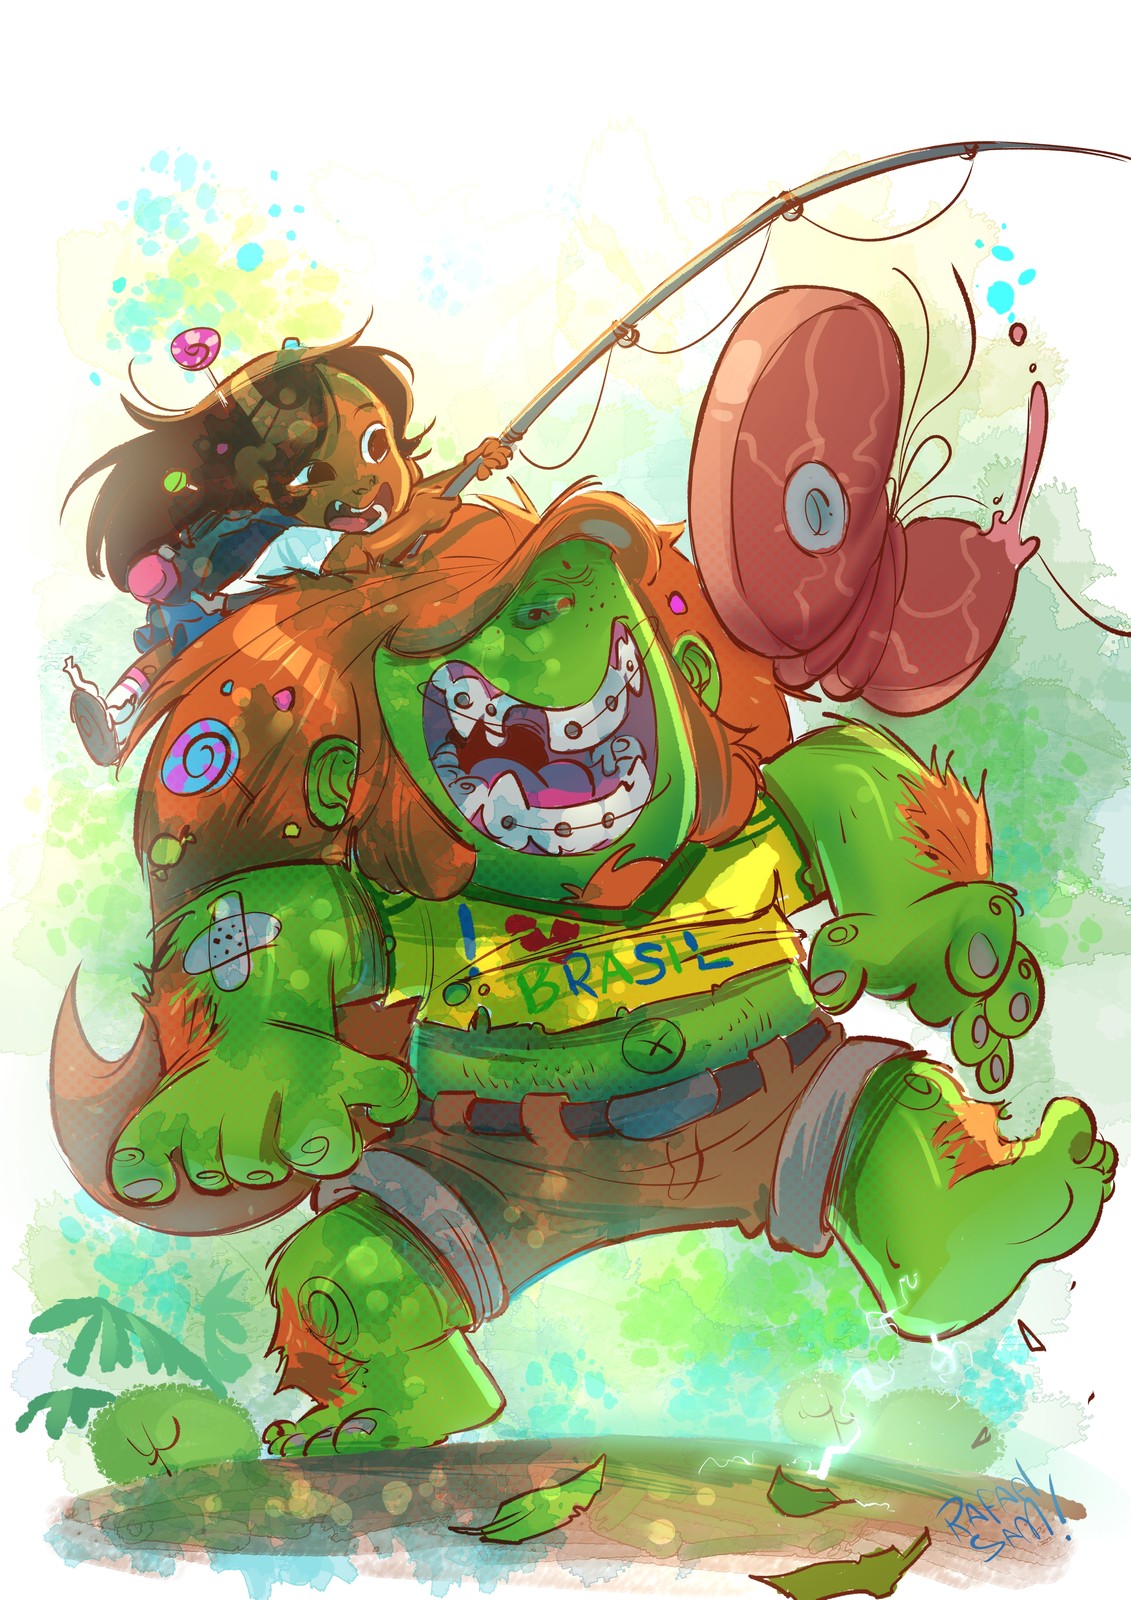 my blanka version of the street fighter game for the chellenge character design group!